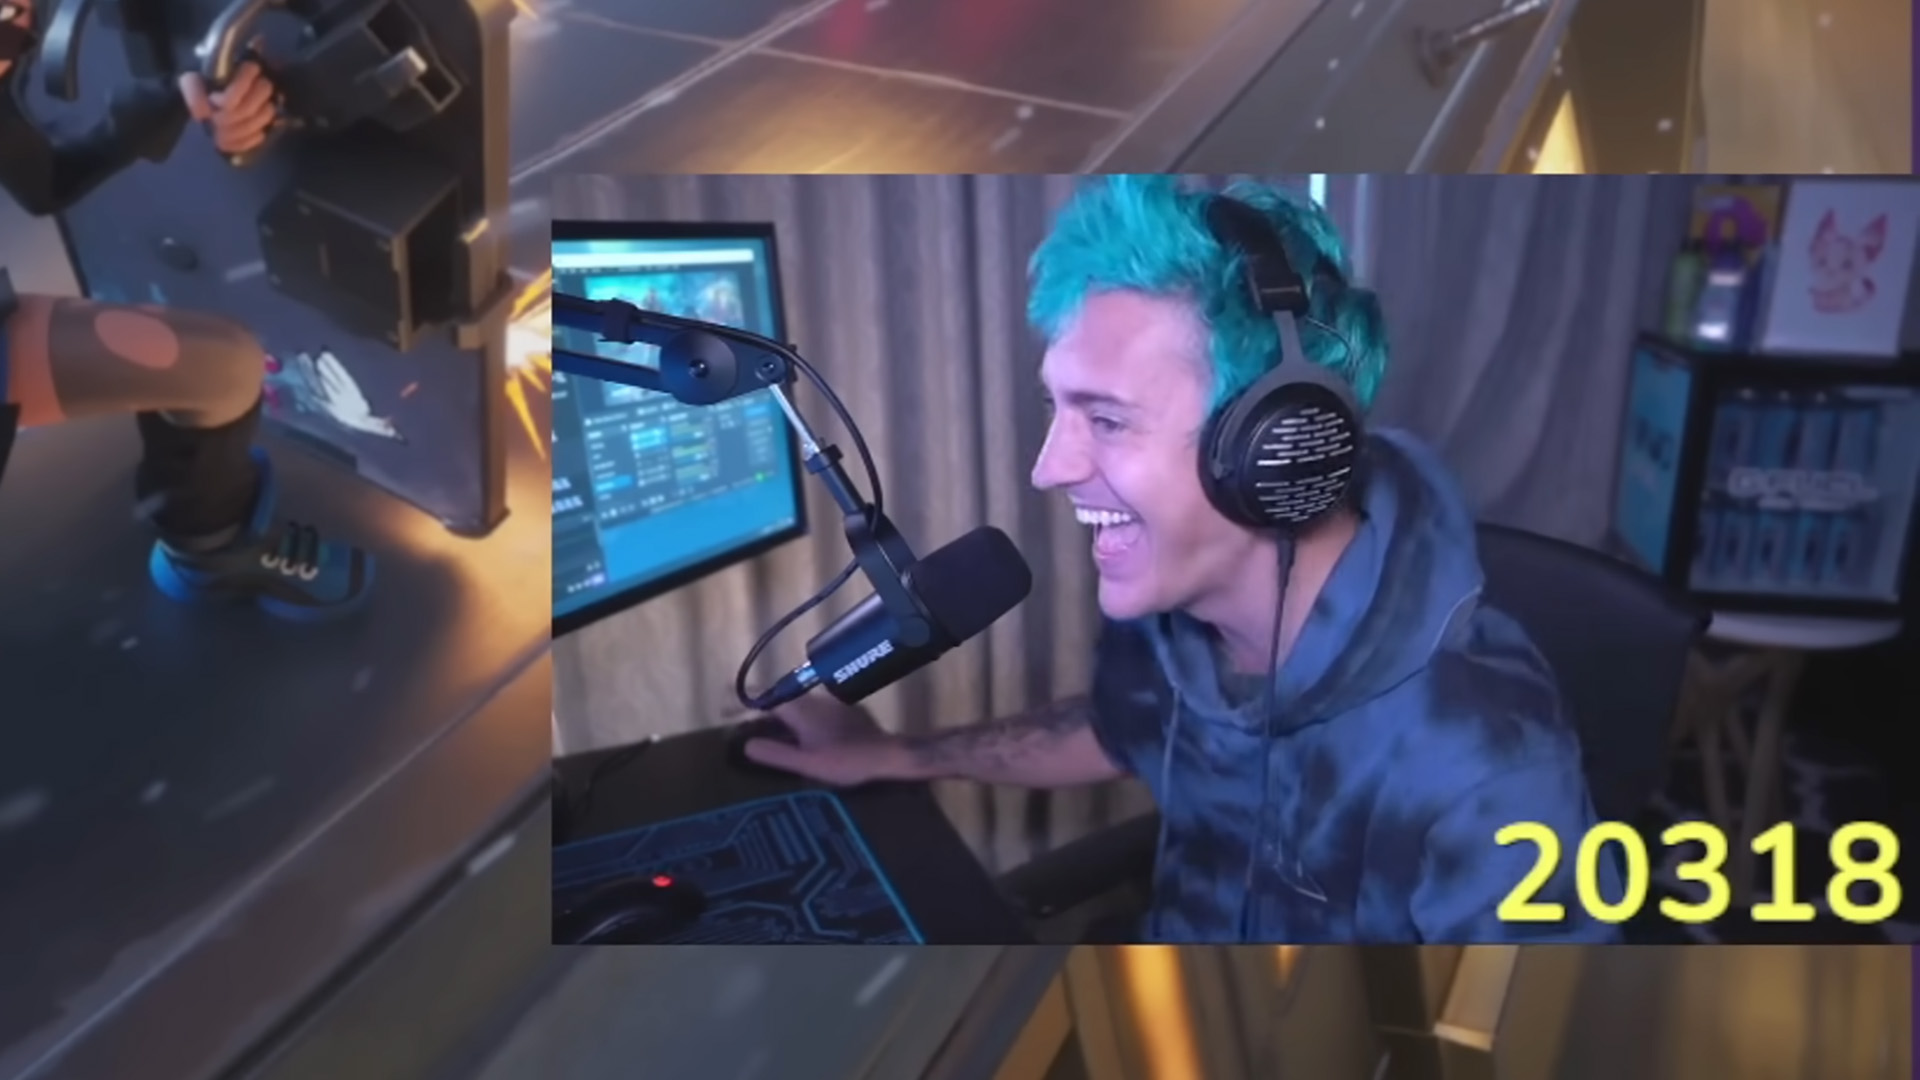 Fortnite streaming icon Ninja announces he has skin cancer, urges fans to get checked